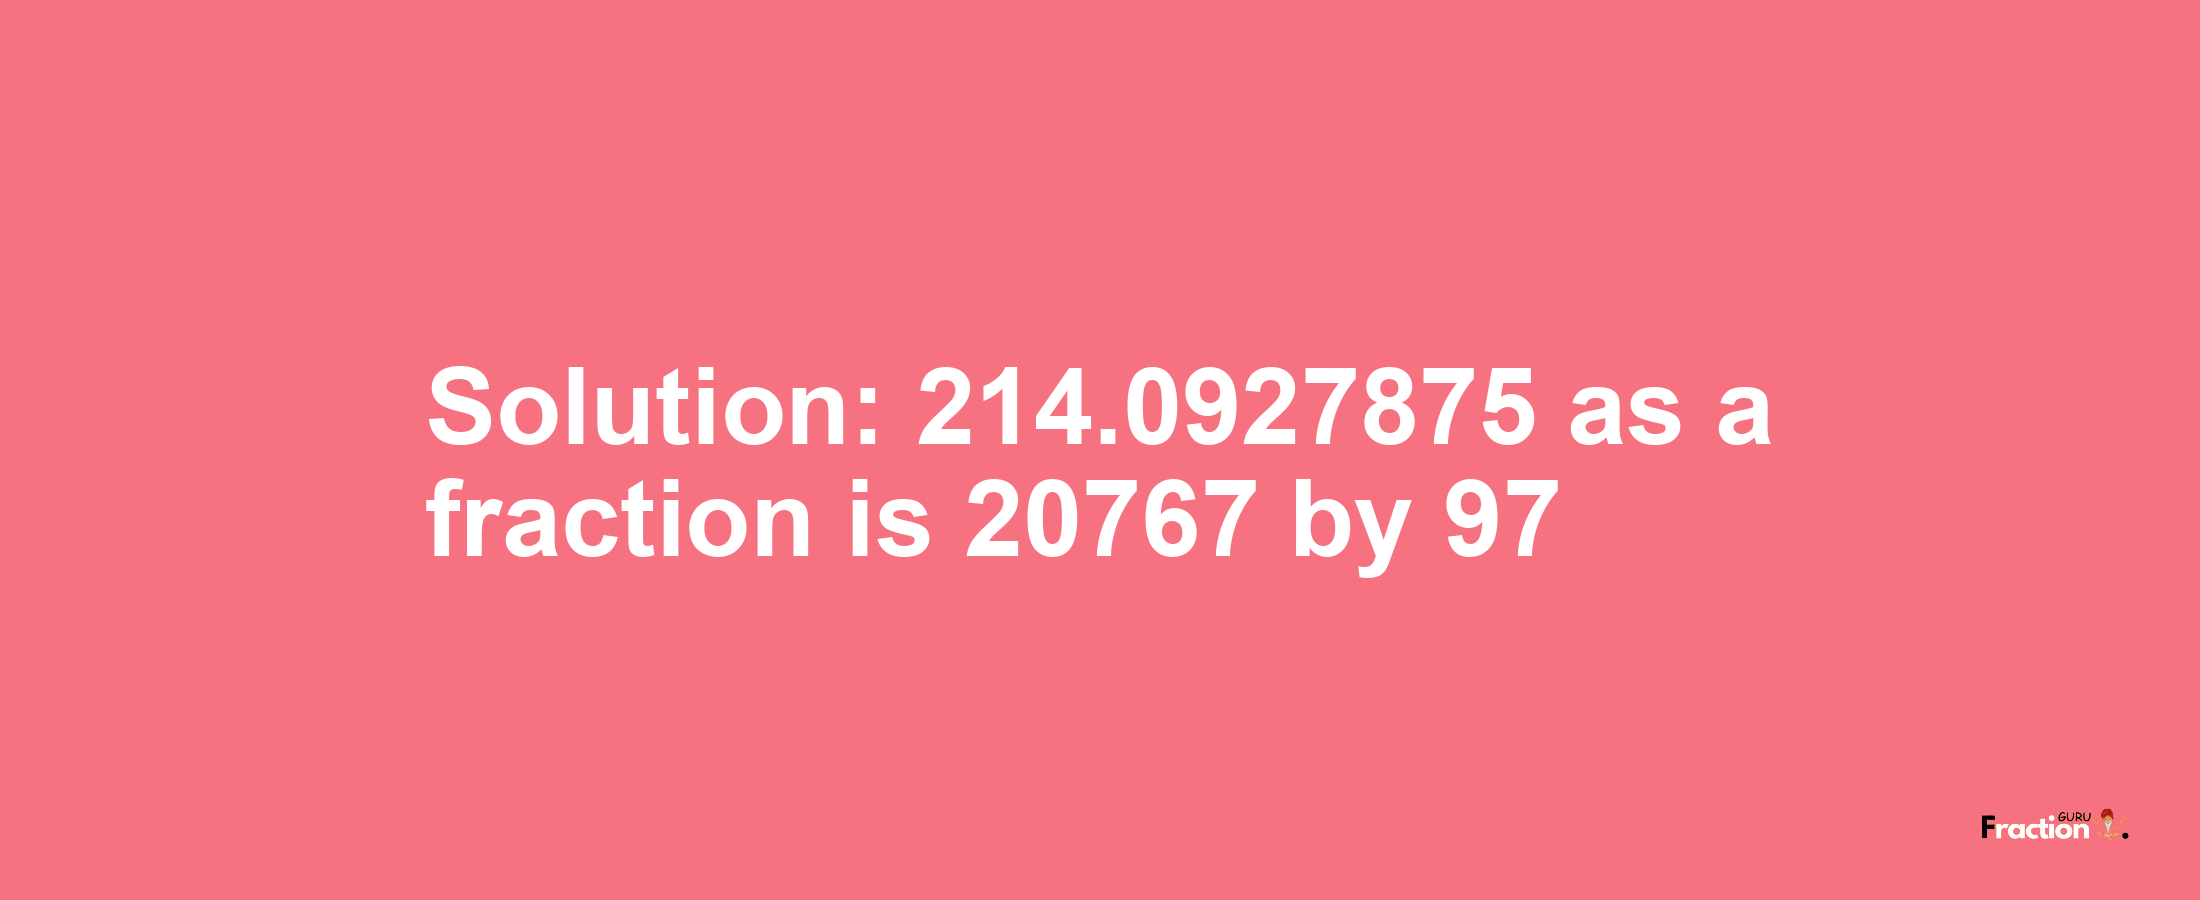 Solution:214.0927875 as a fraction is 20767/97